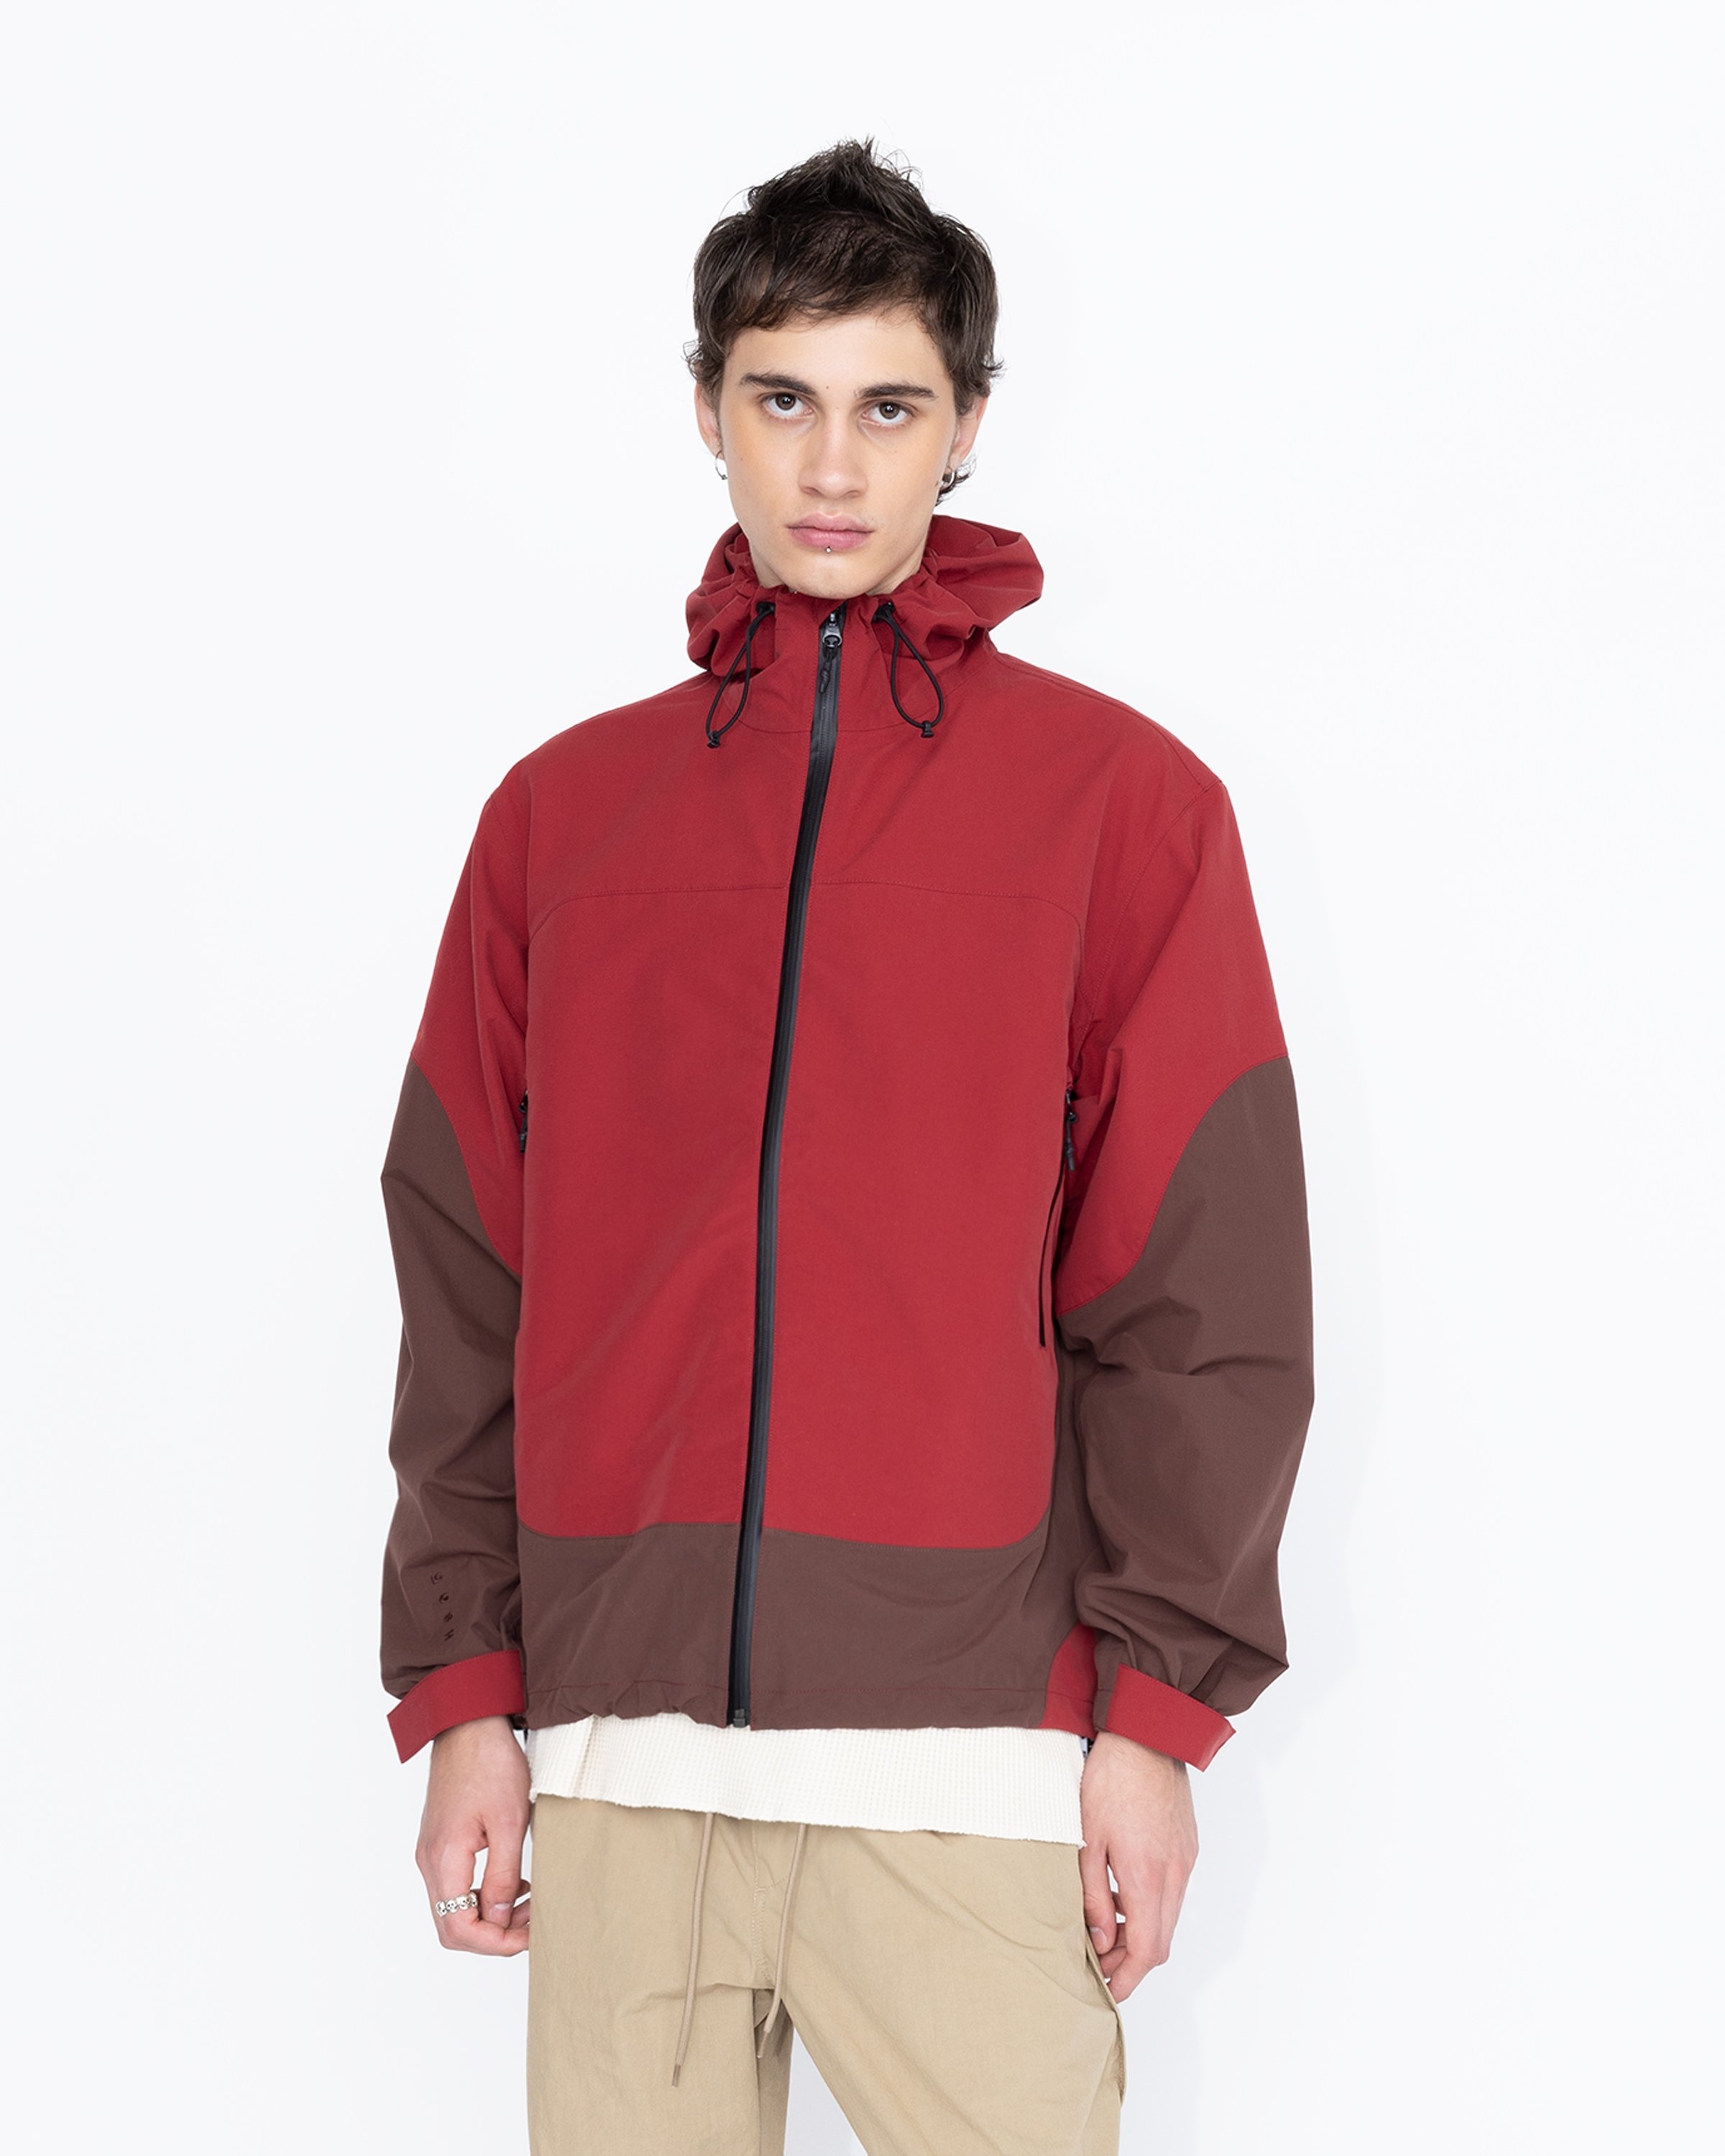 Highsnobiety HS05 – 3 Layer Taped Nylon Jacket Ruby - Outerwear - Red - Image 3